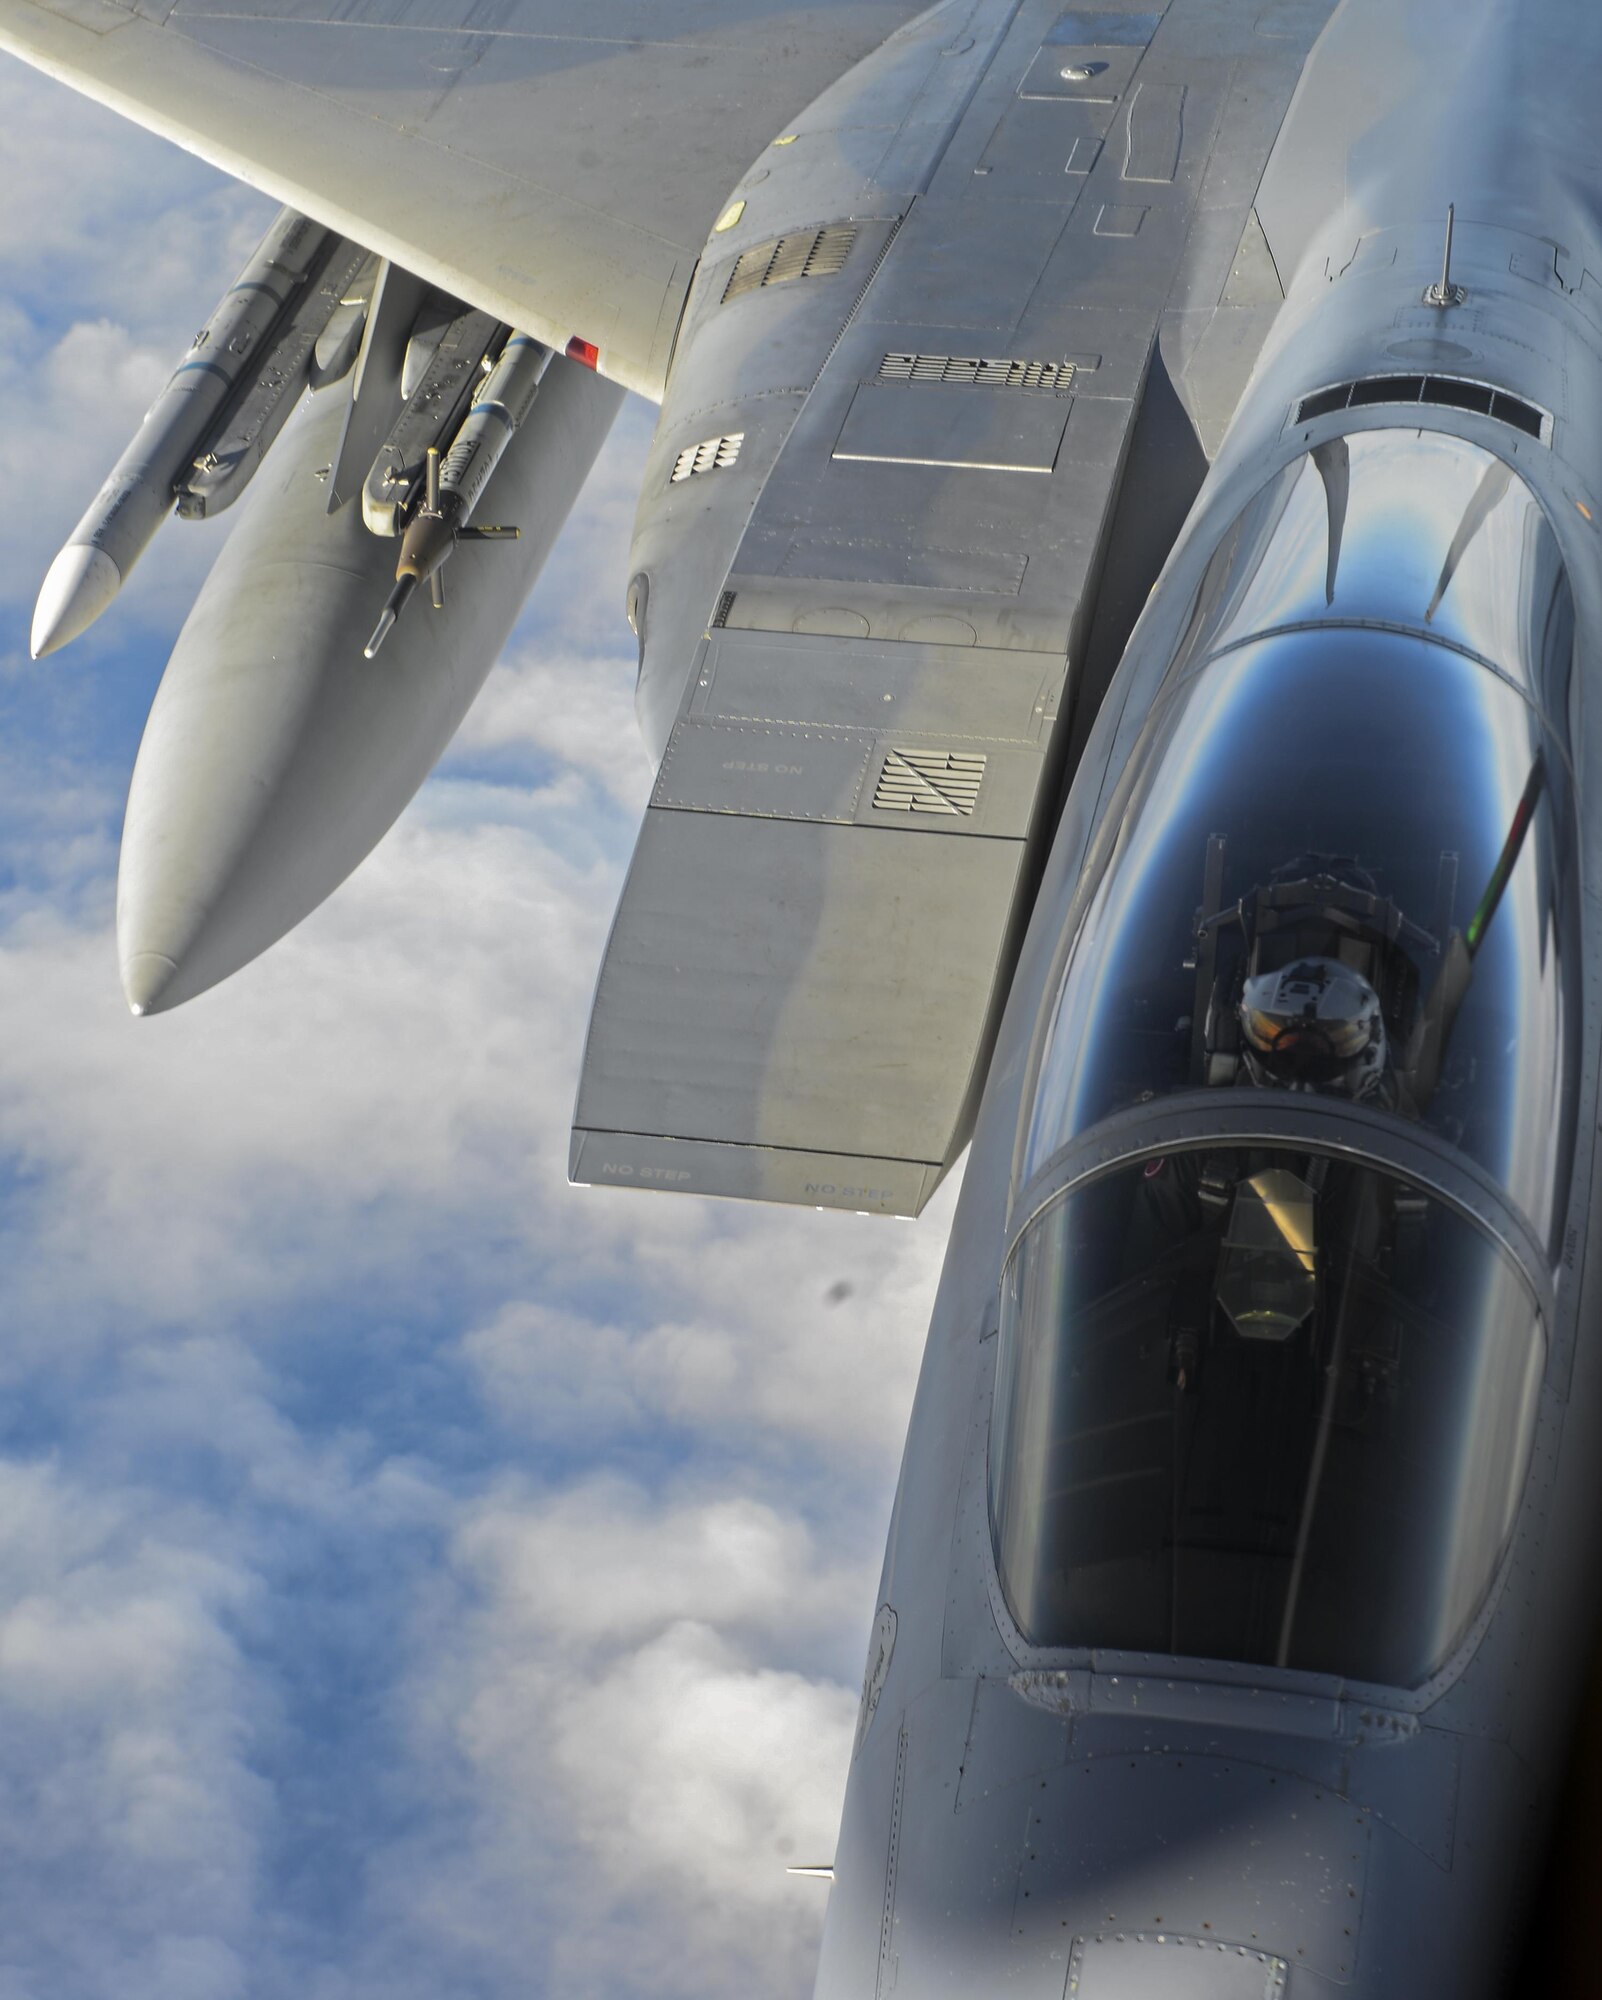 An U.S. Air Force F-15C Eagle assigned to the 48th Fighter Wing from RAF Lakenheath, England, prepares to take fuel from a KC-135 Stratotanker assigned to the 349th Air Mobility Wing from Beale Air Force Base, Calif., Dec. 2, 2016, over the Atlantic Ocean. Both the F-15D and F-15C models are equipped with a Production Eagle Package which enables them to carry 2,000 pounds of additional internal fuel and have a maximum takeoff weight of up to 68,000 pounds. (U.S. Air Force photo by Staff Sgt. Micaiah Anthony)